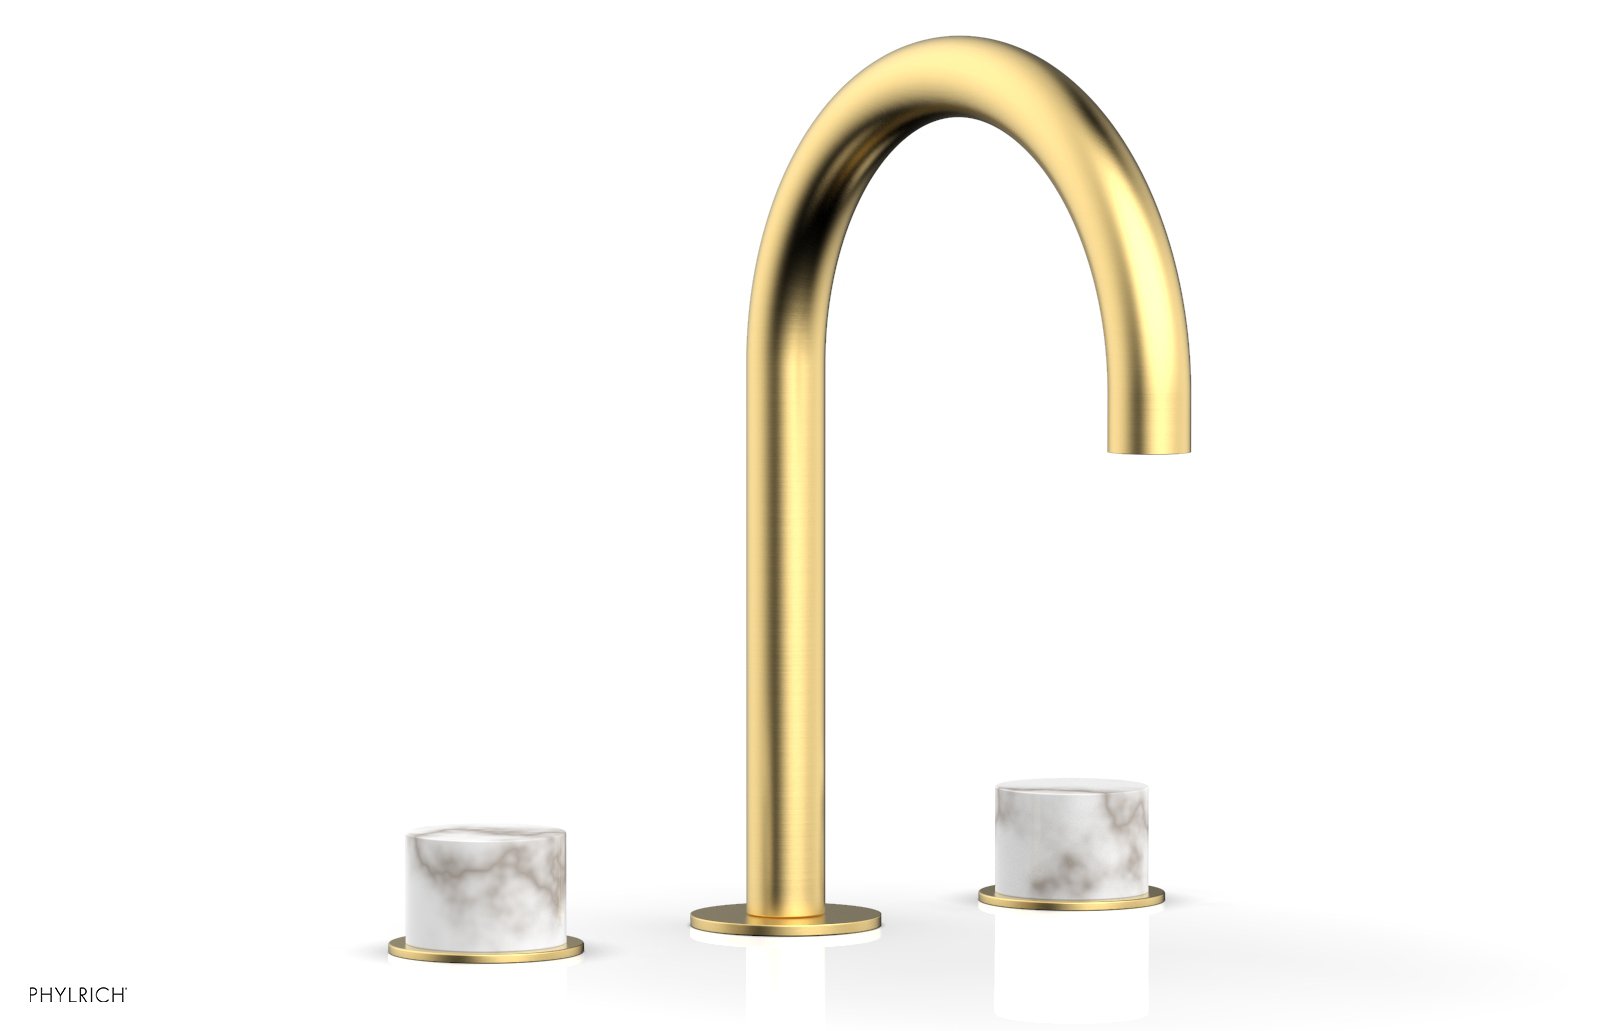 Phylrich BASIC II Widespread Faucet - White Marble Handles